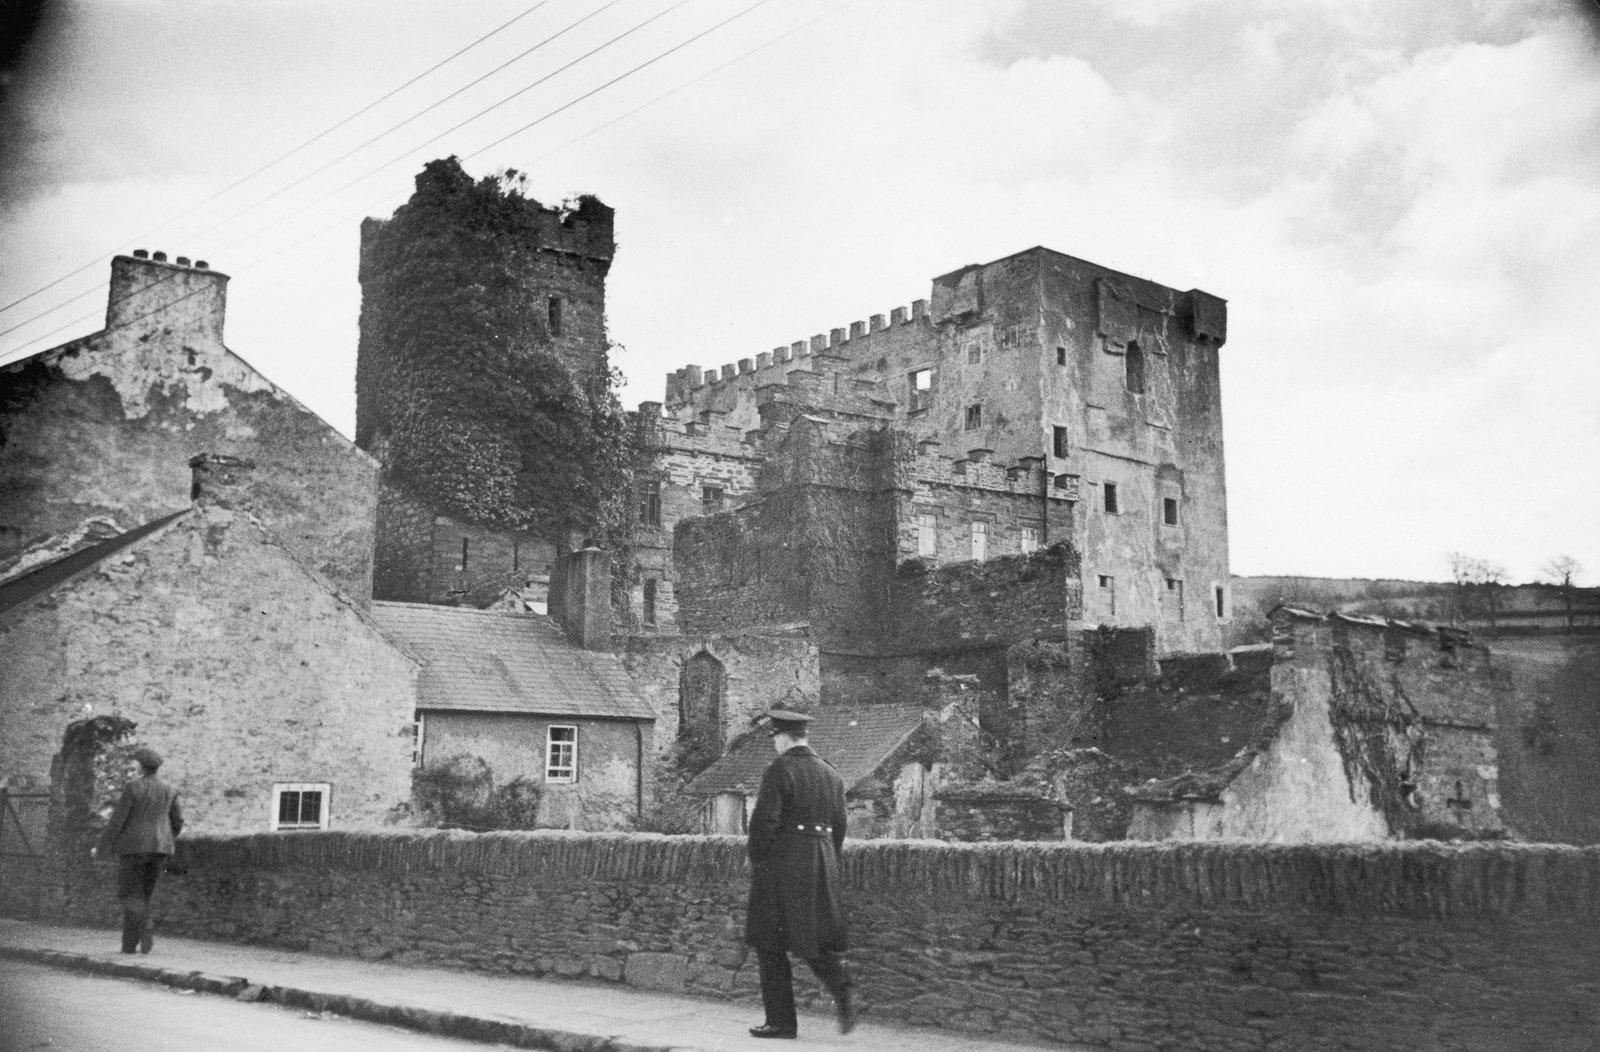 Image - The ruins of Macroom Castle in County Cork, in an image taken on May 23rd 1935 (Photo by Daily Mirror/Mirrorpix/Mirrorpix via Getty Images)